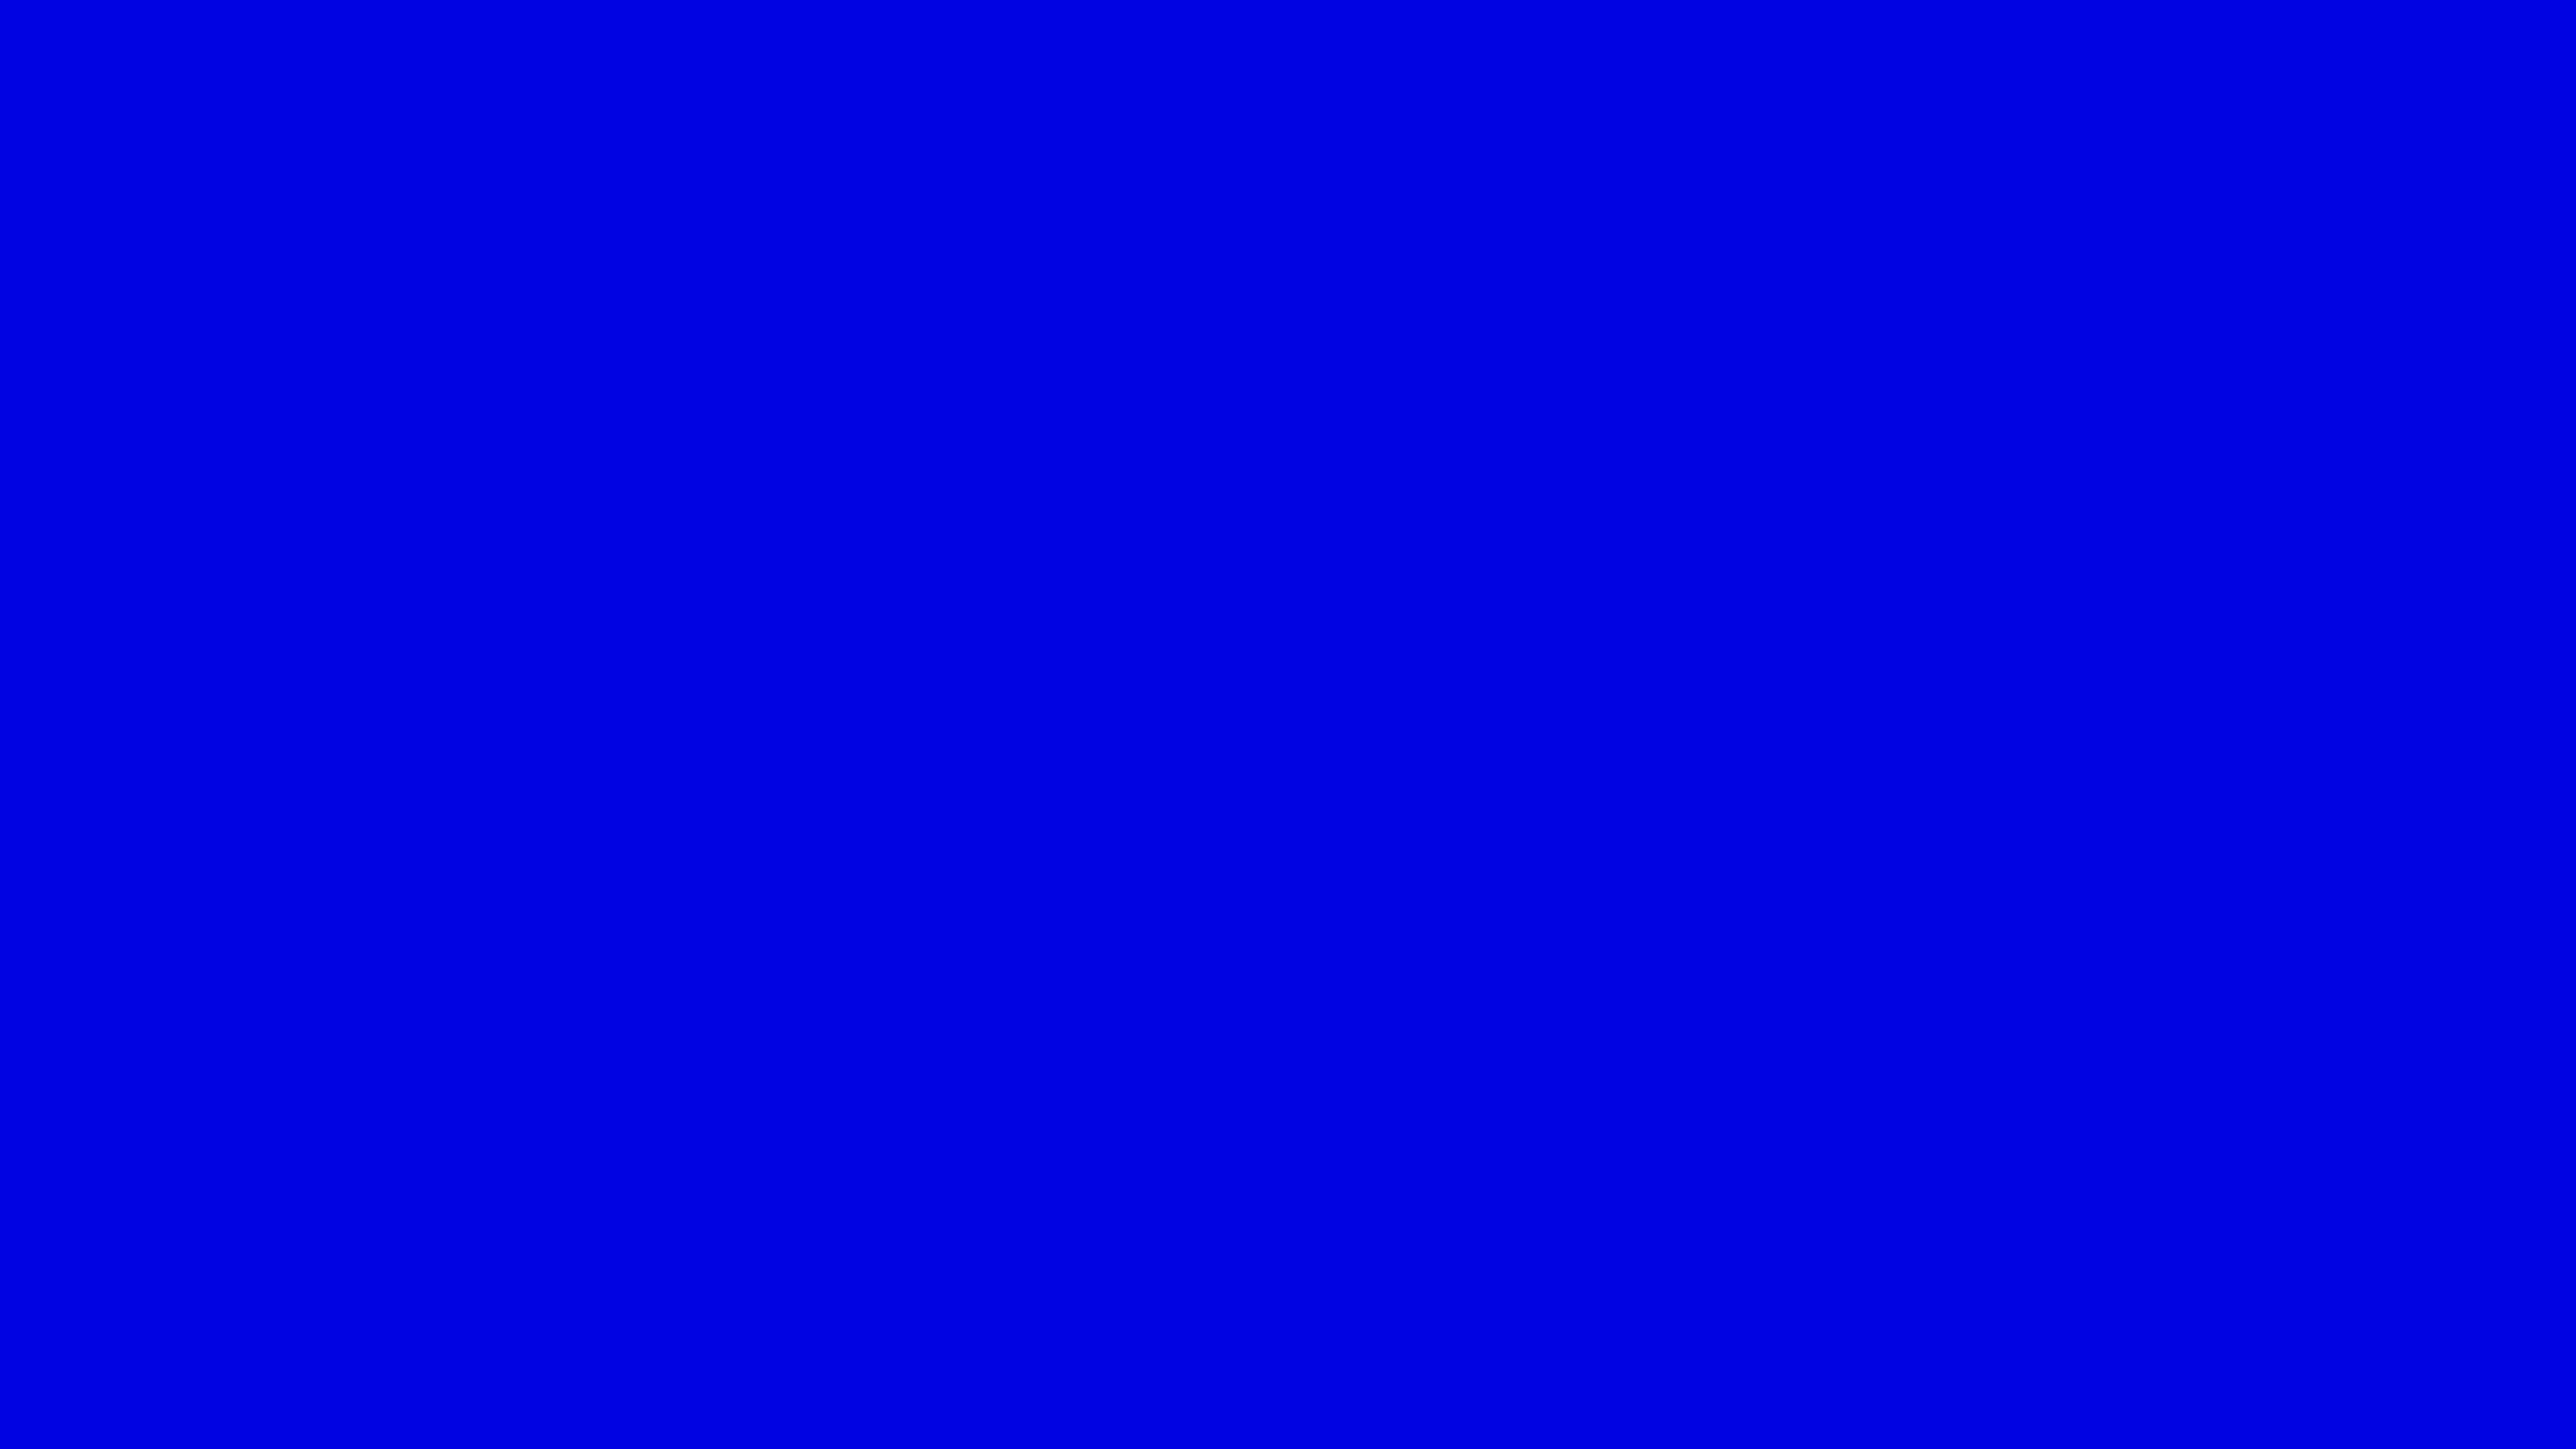 Pure Blue Solid Color Background Image Free Image Generator